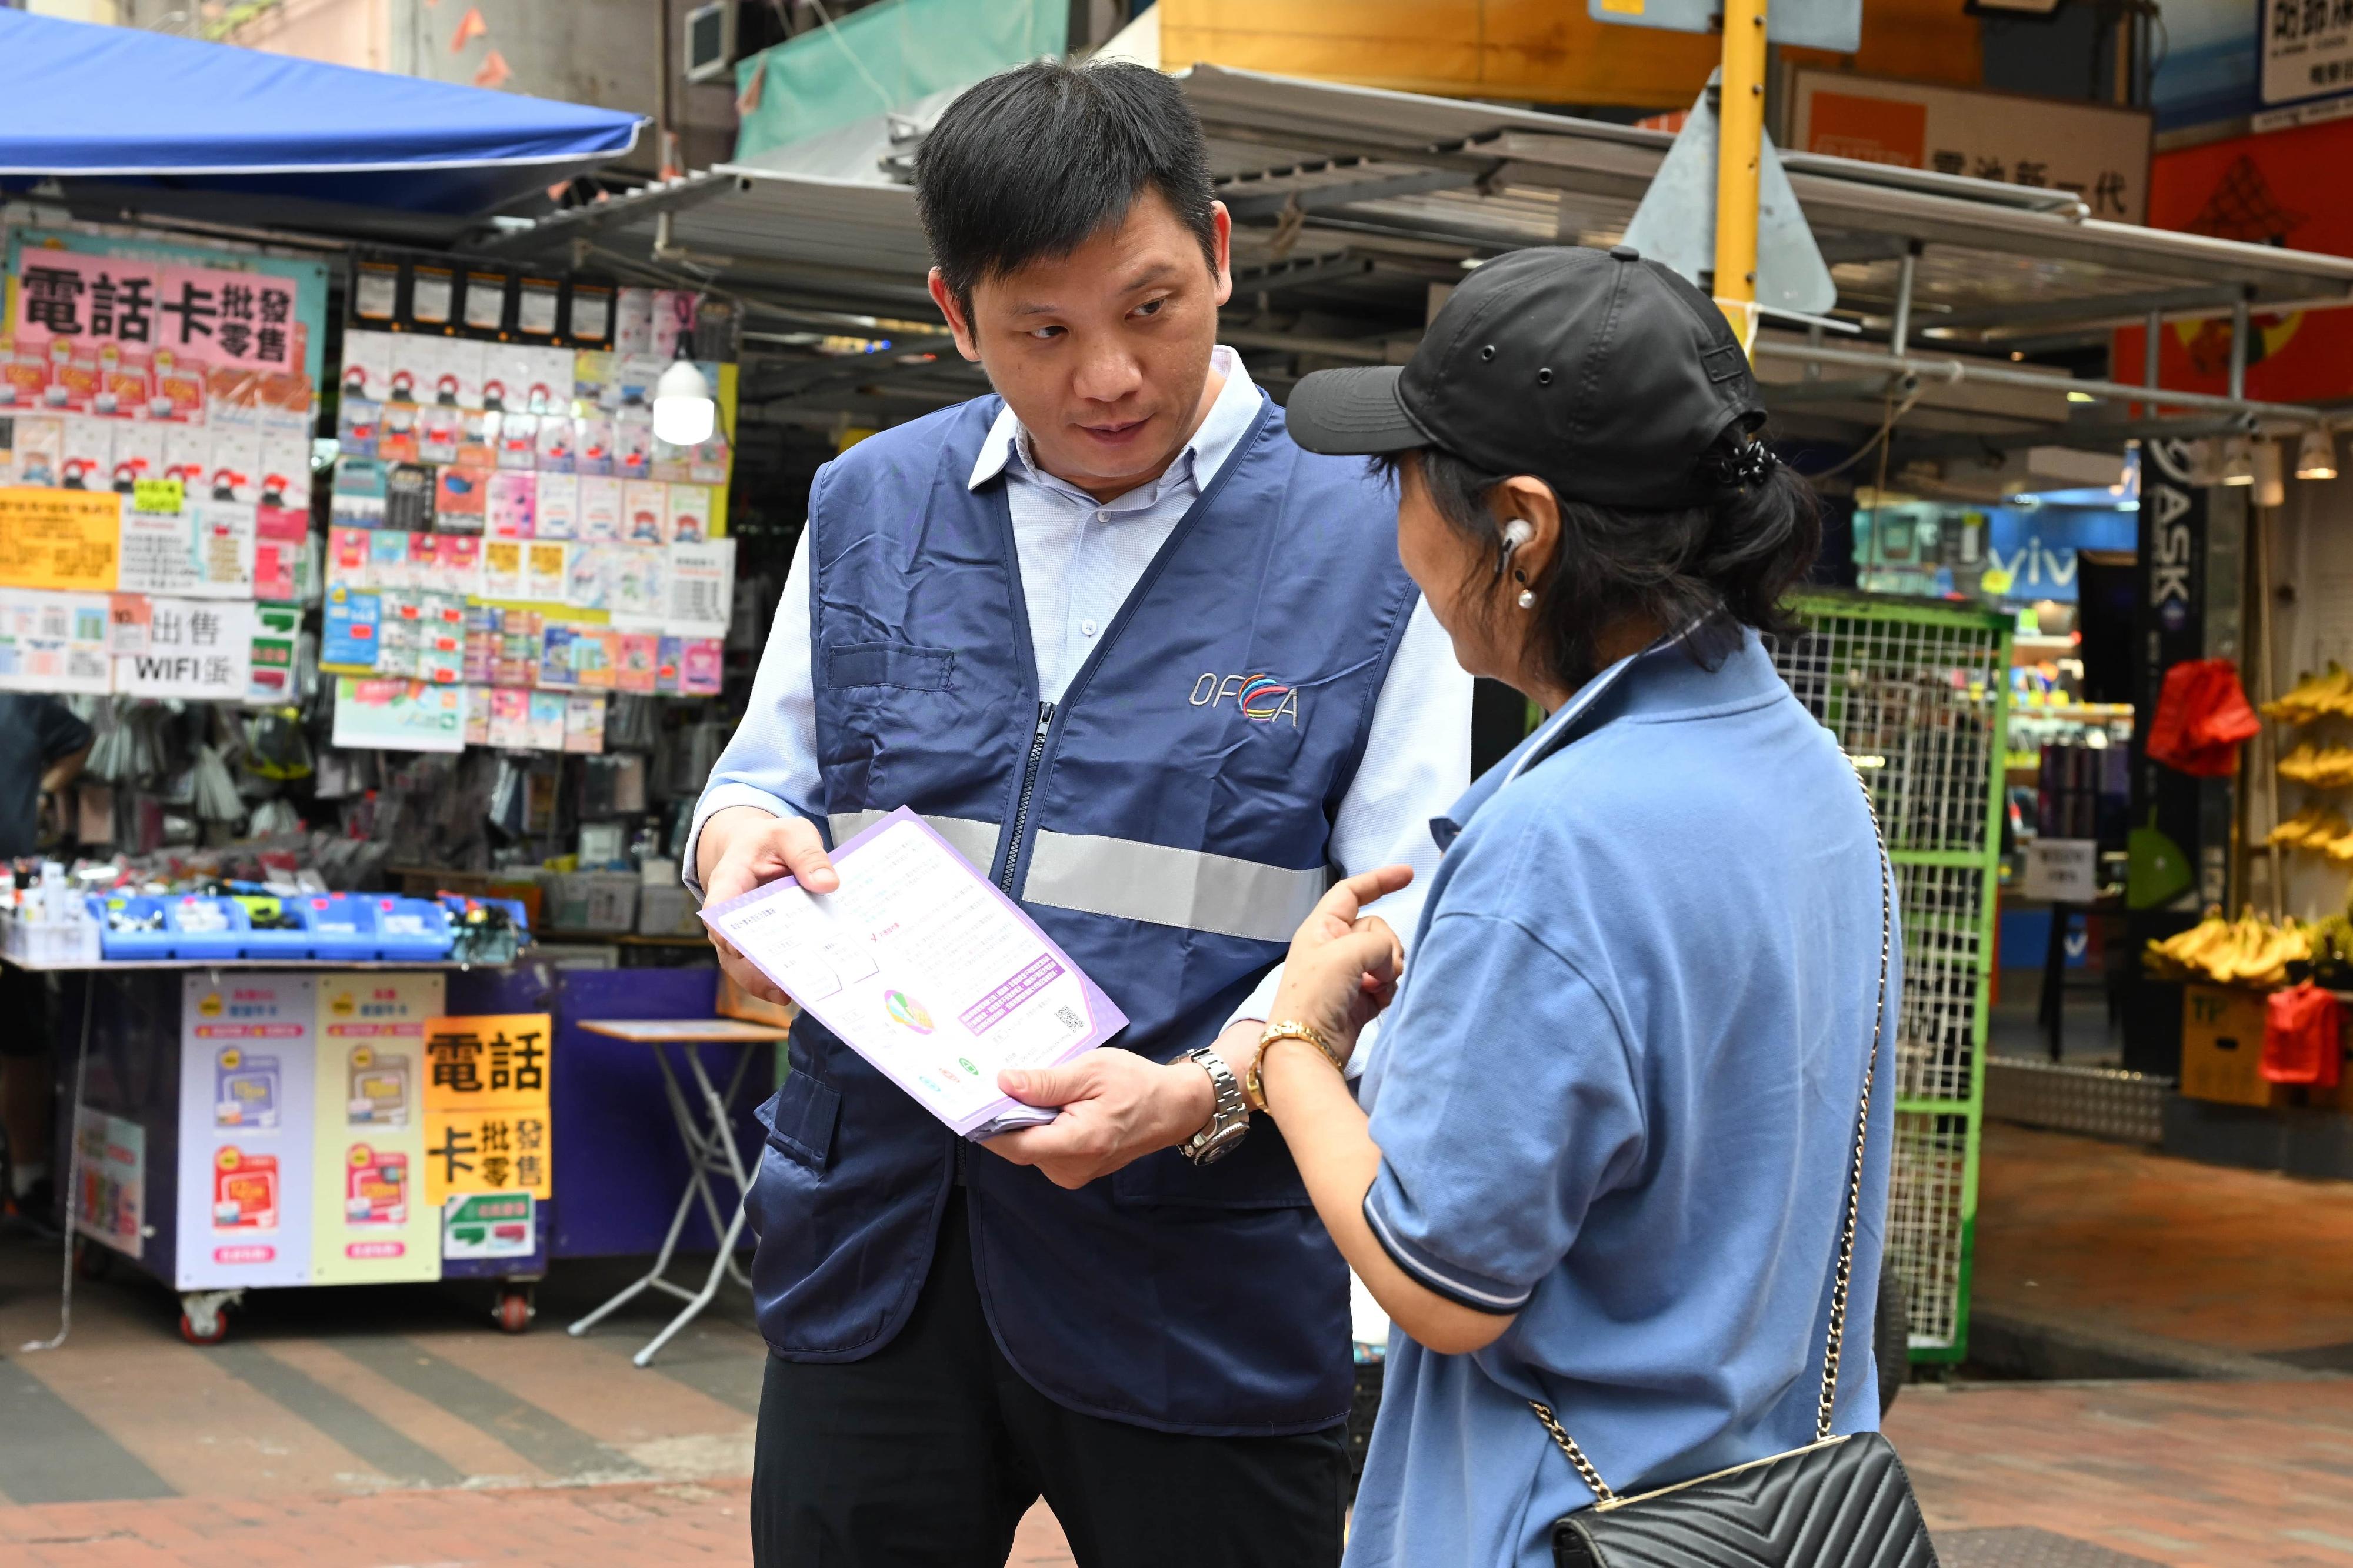 The Office of the Communications Authority conducted today (May 25) an ad hoc market surveillance around Apliu Street in Sham Shui Po on real-name registration for SIM cards, and distributed pamphlets to members of the public reminding them to complete registration using their own identity document.